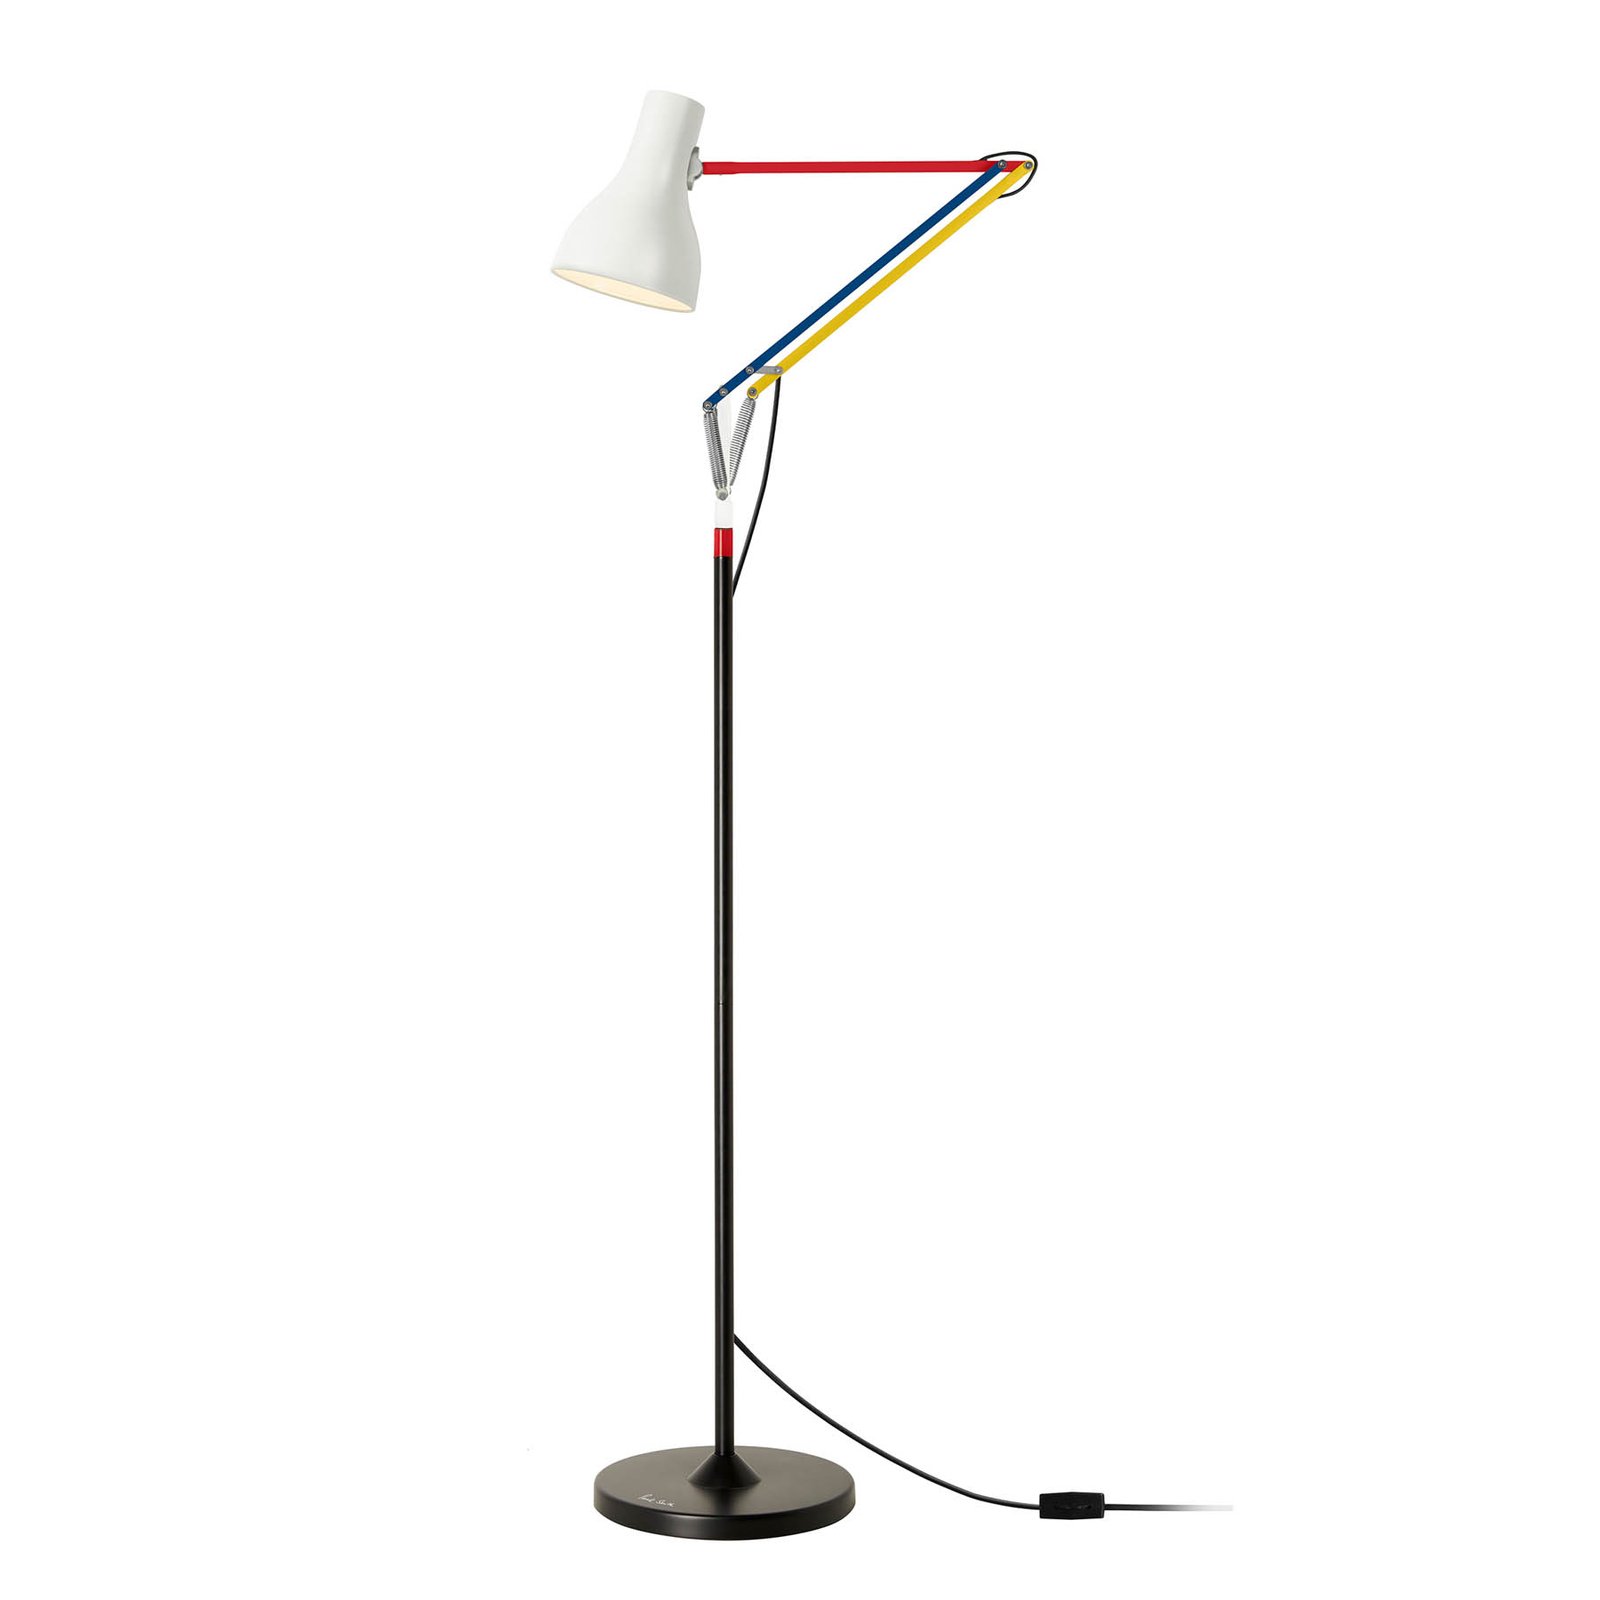 Anglepoise Type 75 LED-Stehlampe Paul Smith | Lampenwelt.de